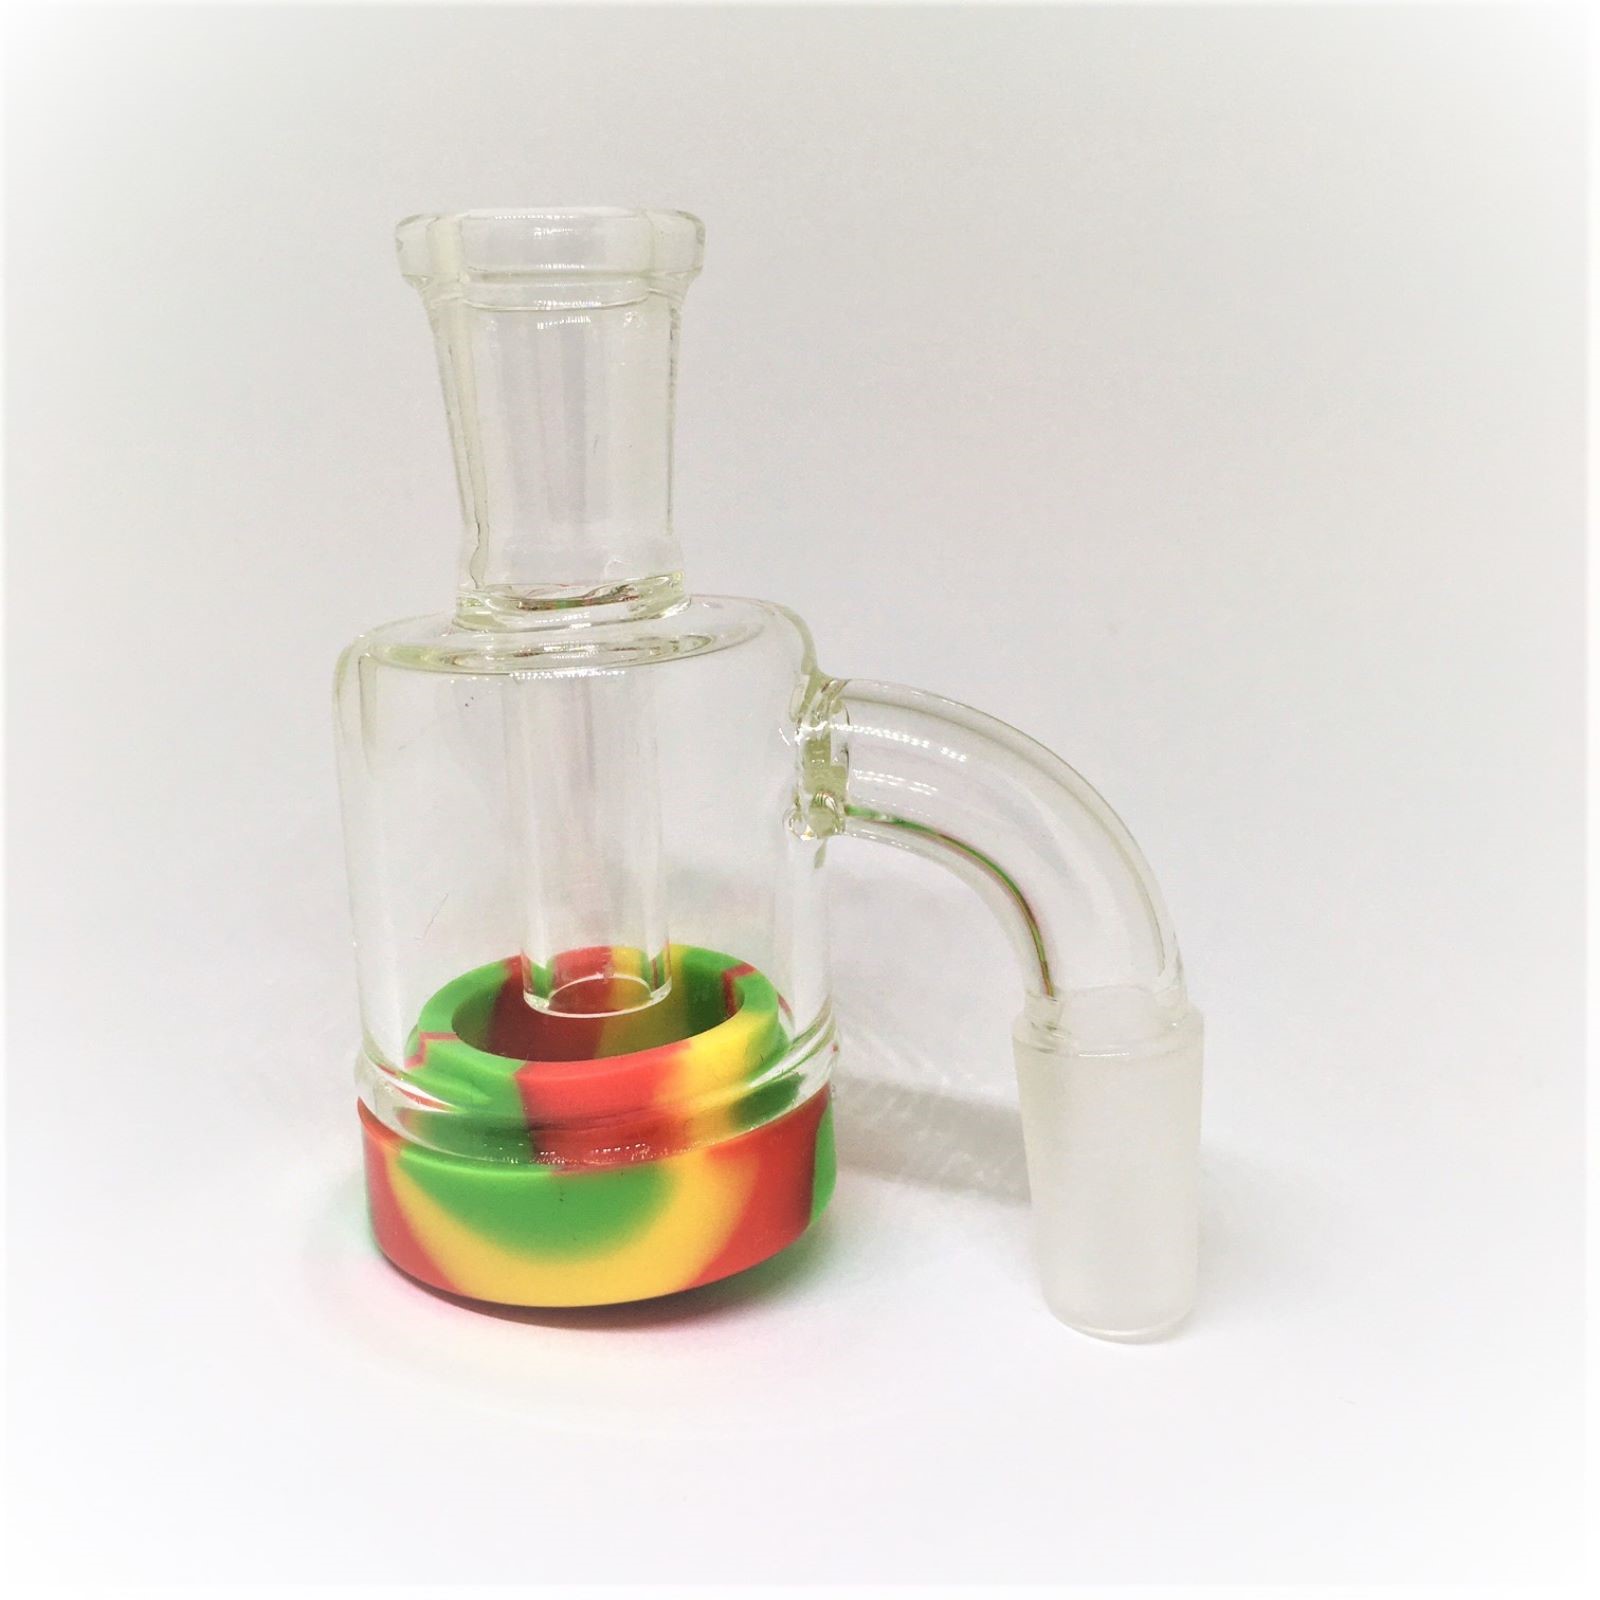 Kings Pipes Online Headshop: Reclaim Catcher